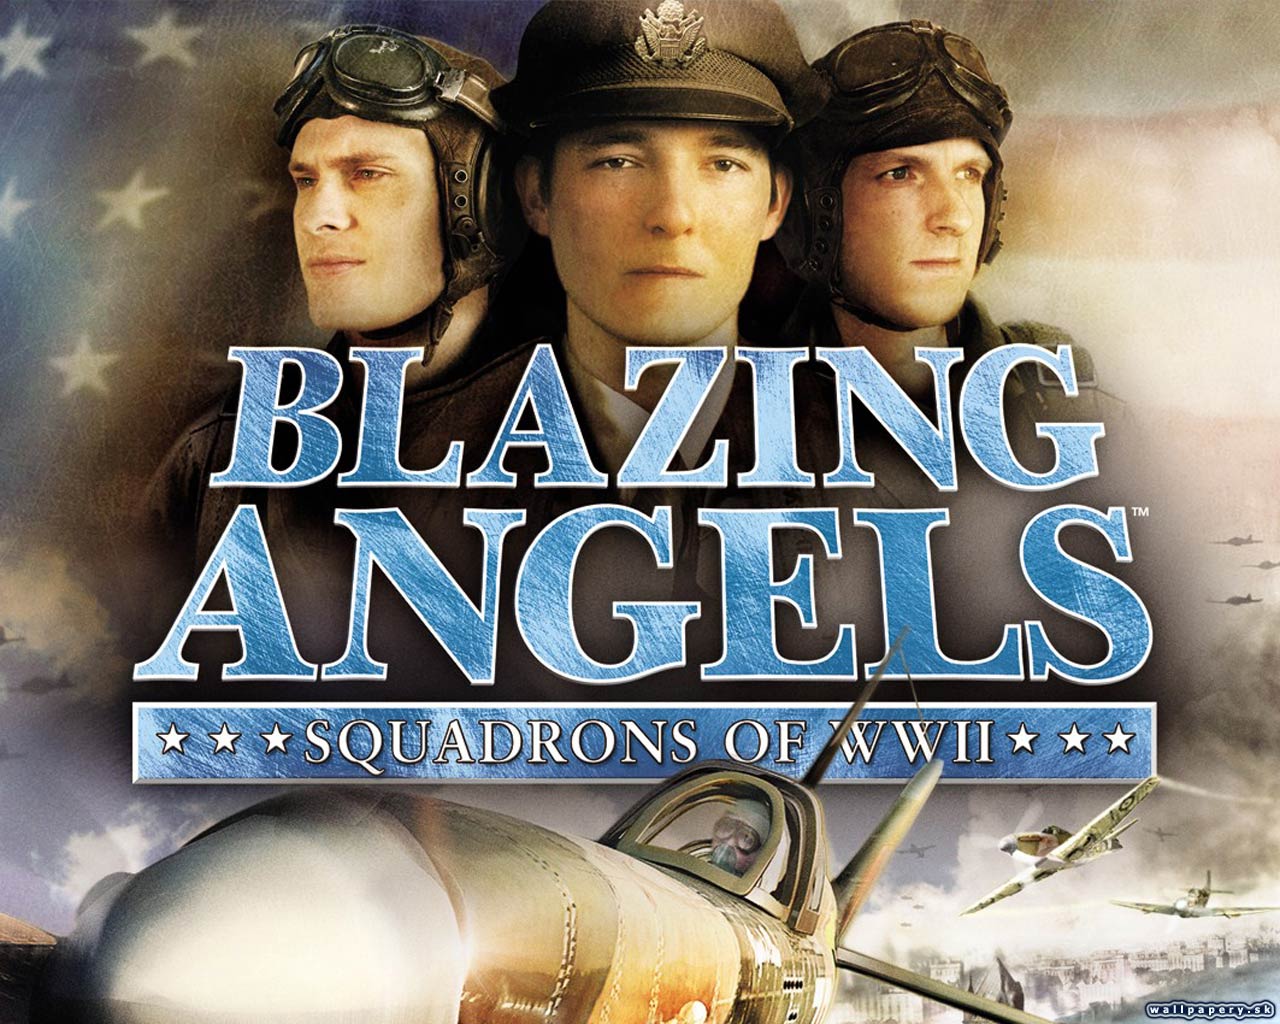 Blazing Angels: Squadrons of WWII - wallpaper 7